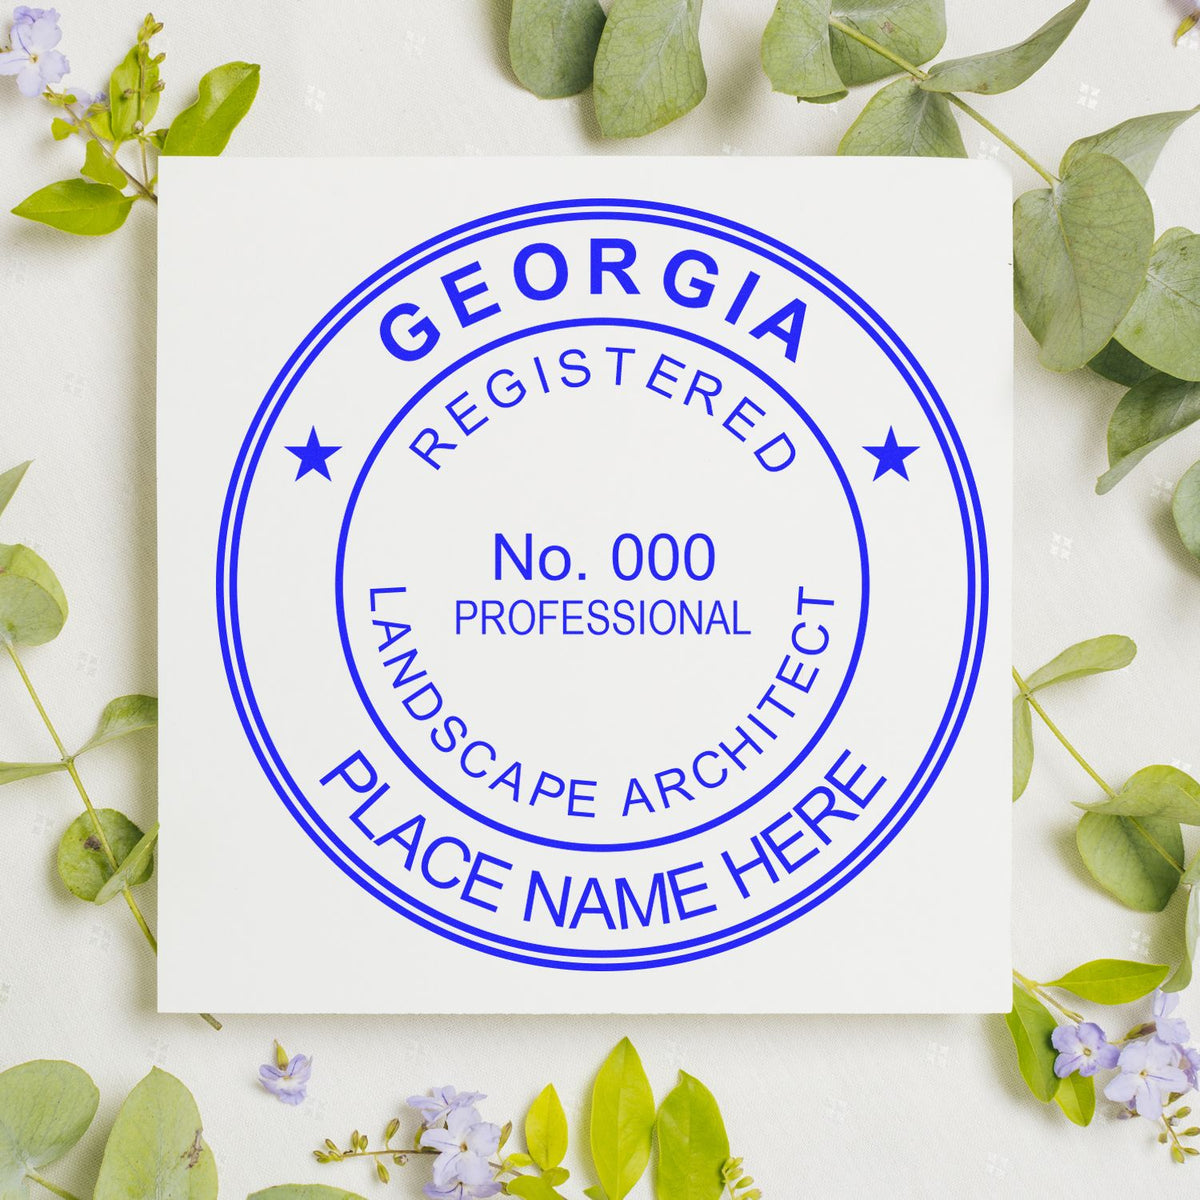 The Digital Georgia Landscape Architect Stamp stamp impression comes to life with a crisp, detailed photo on paper - showcasing true professional quality.